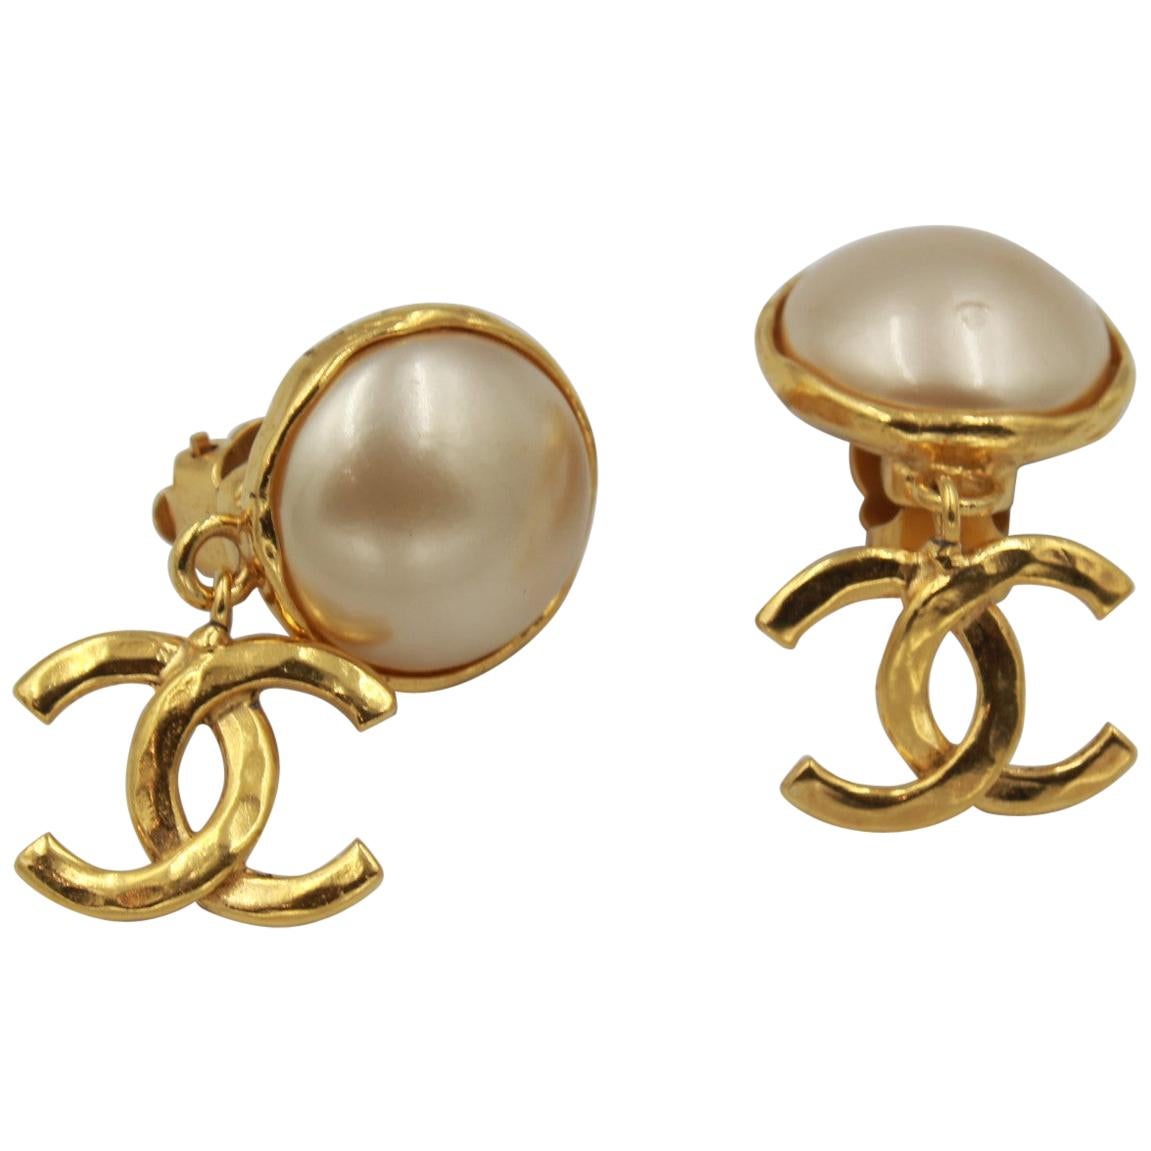 Vintage Chanel earring in gold metal and pearl